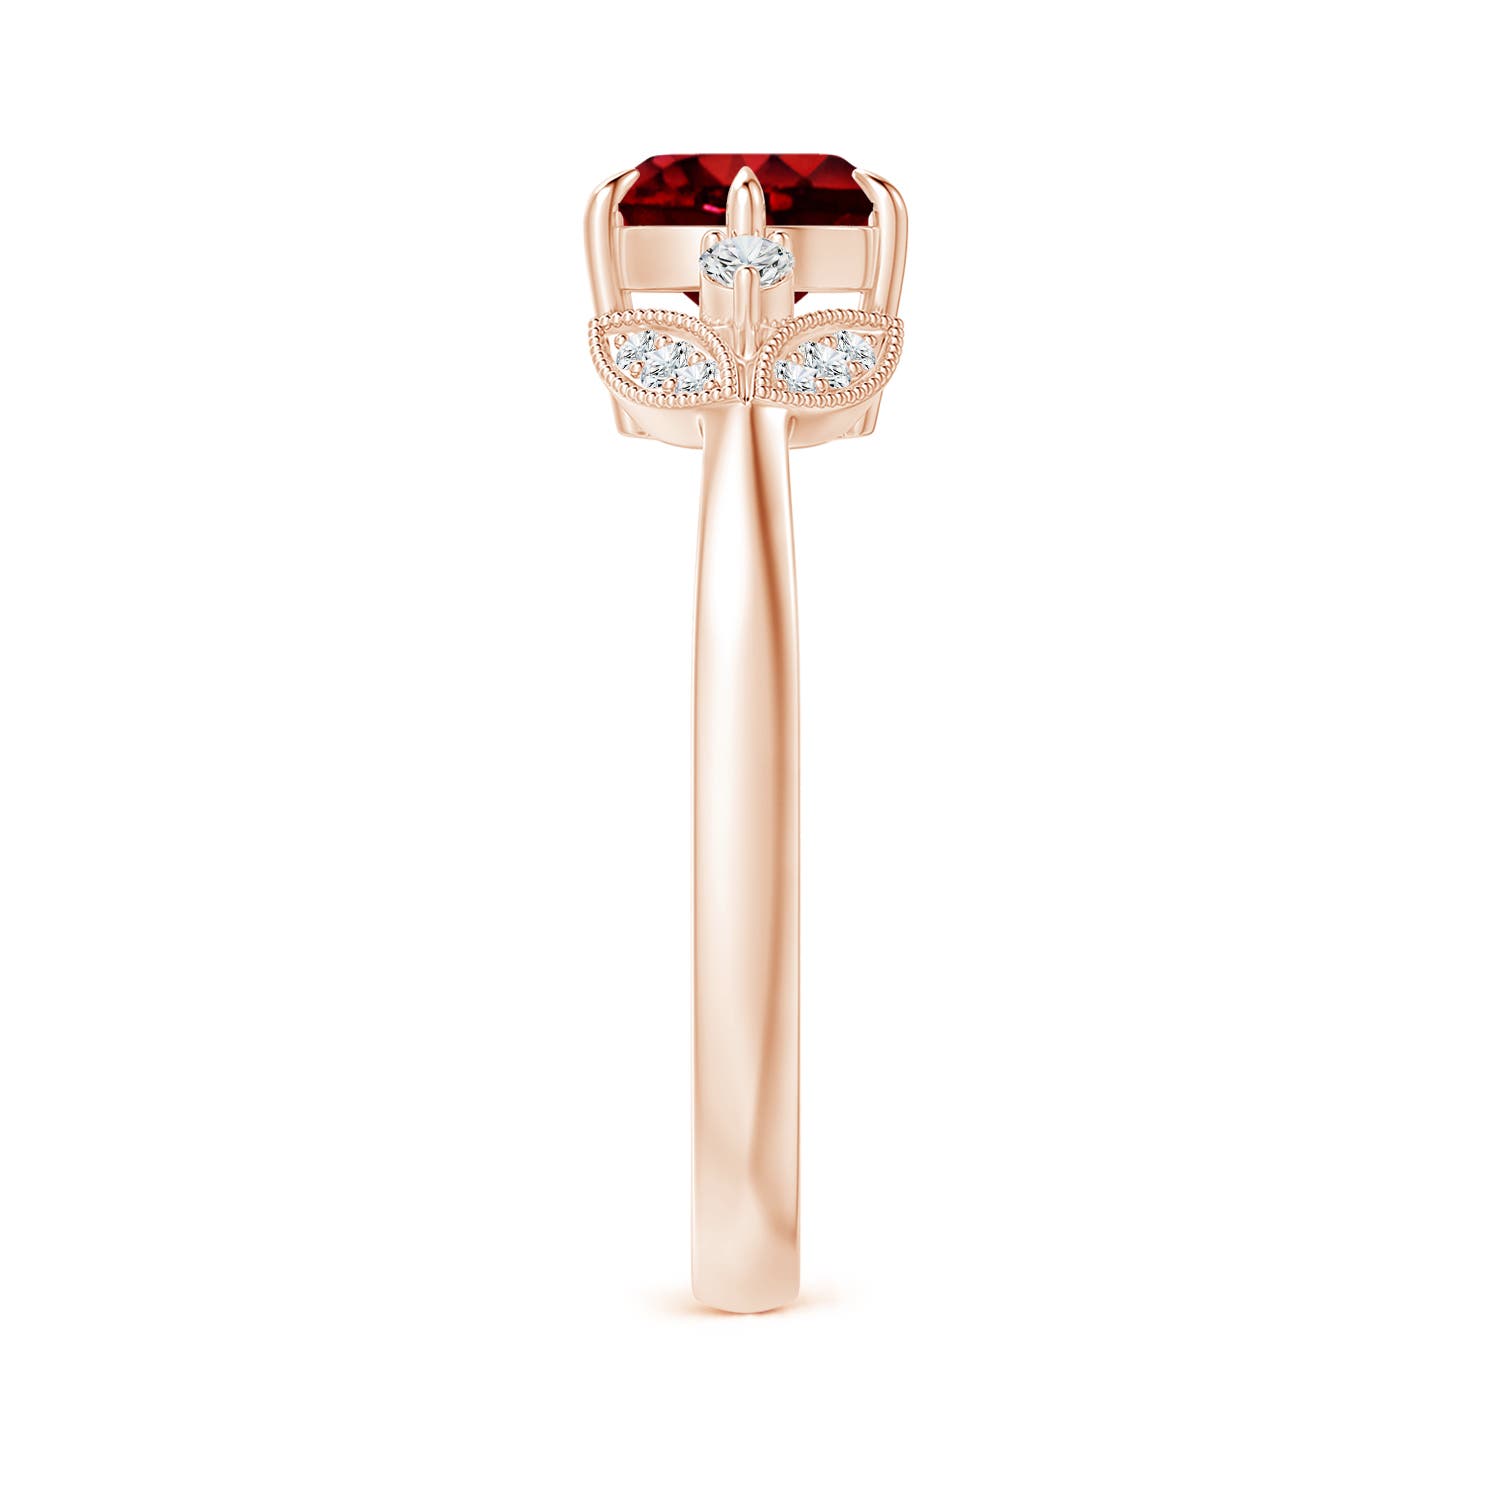 AAAA - Ruby / 1.64 CT / 14 KT Rose Gold